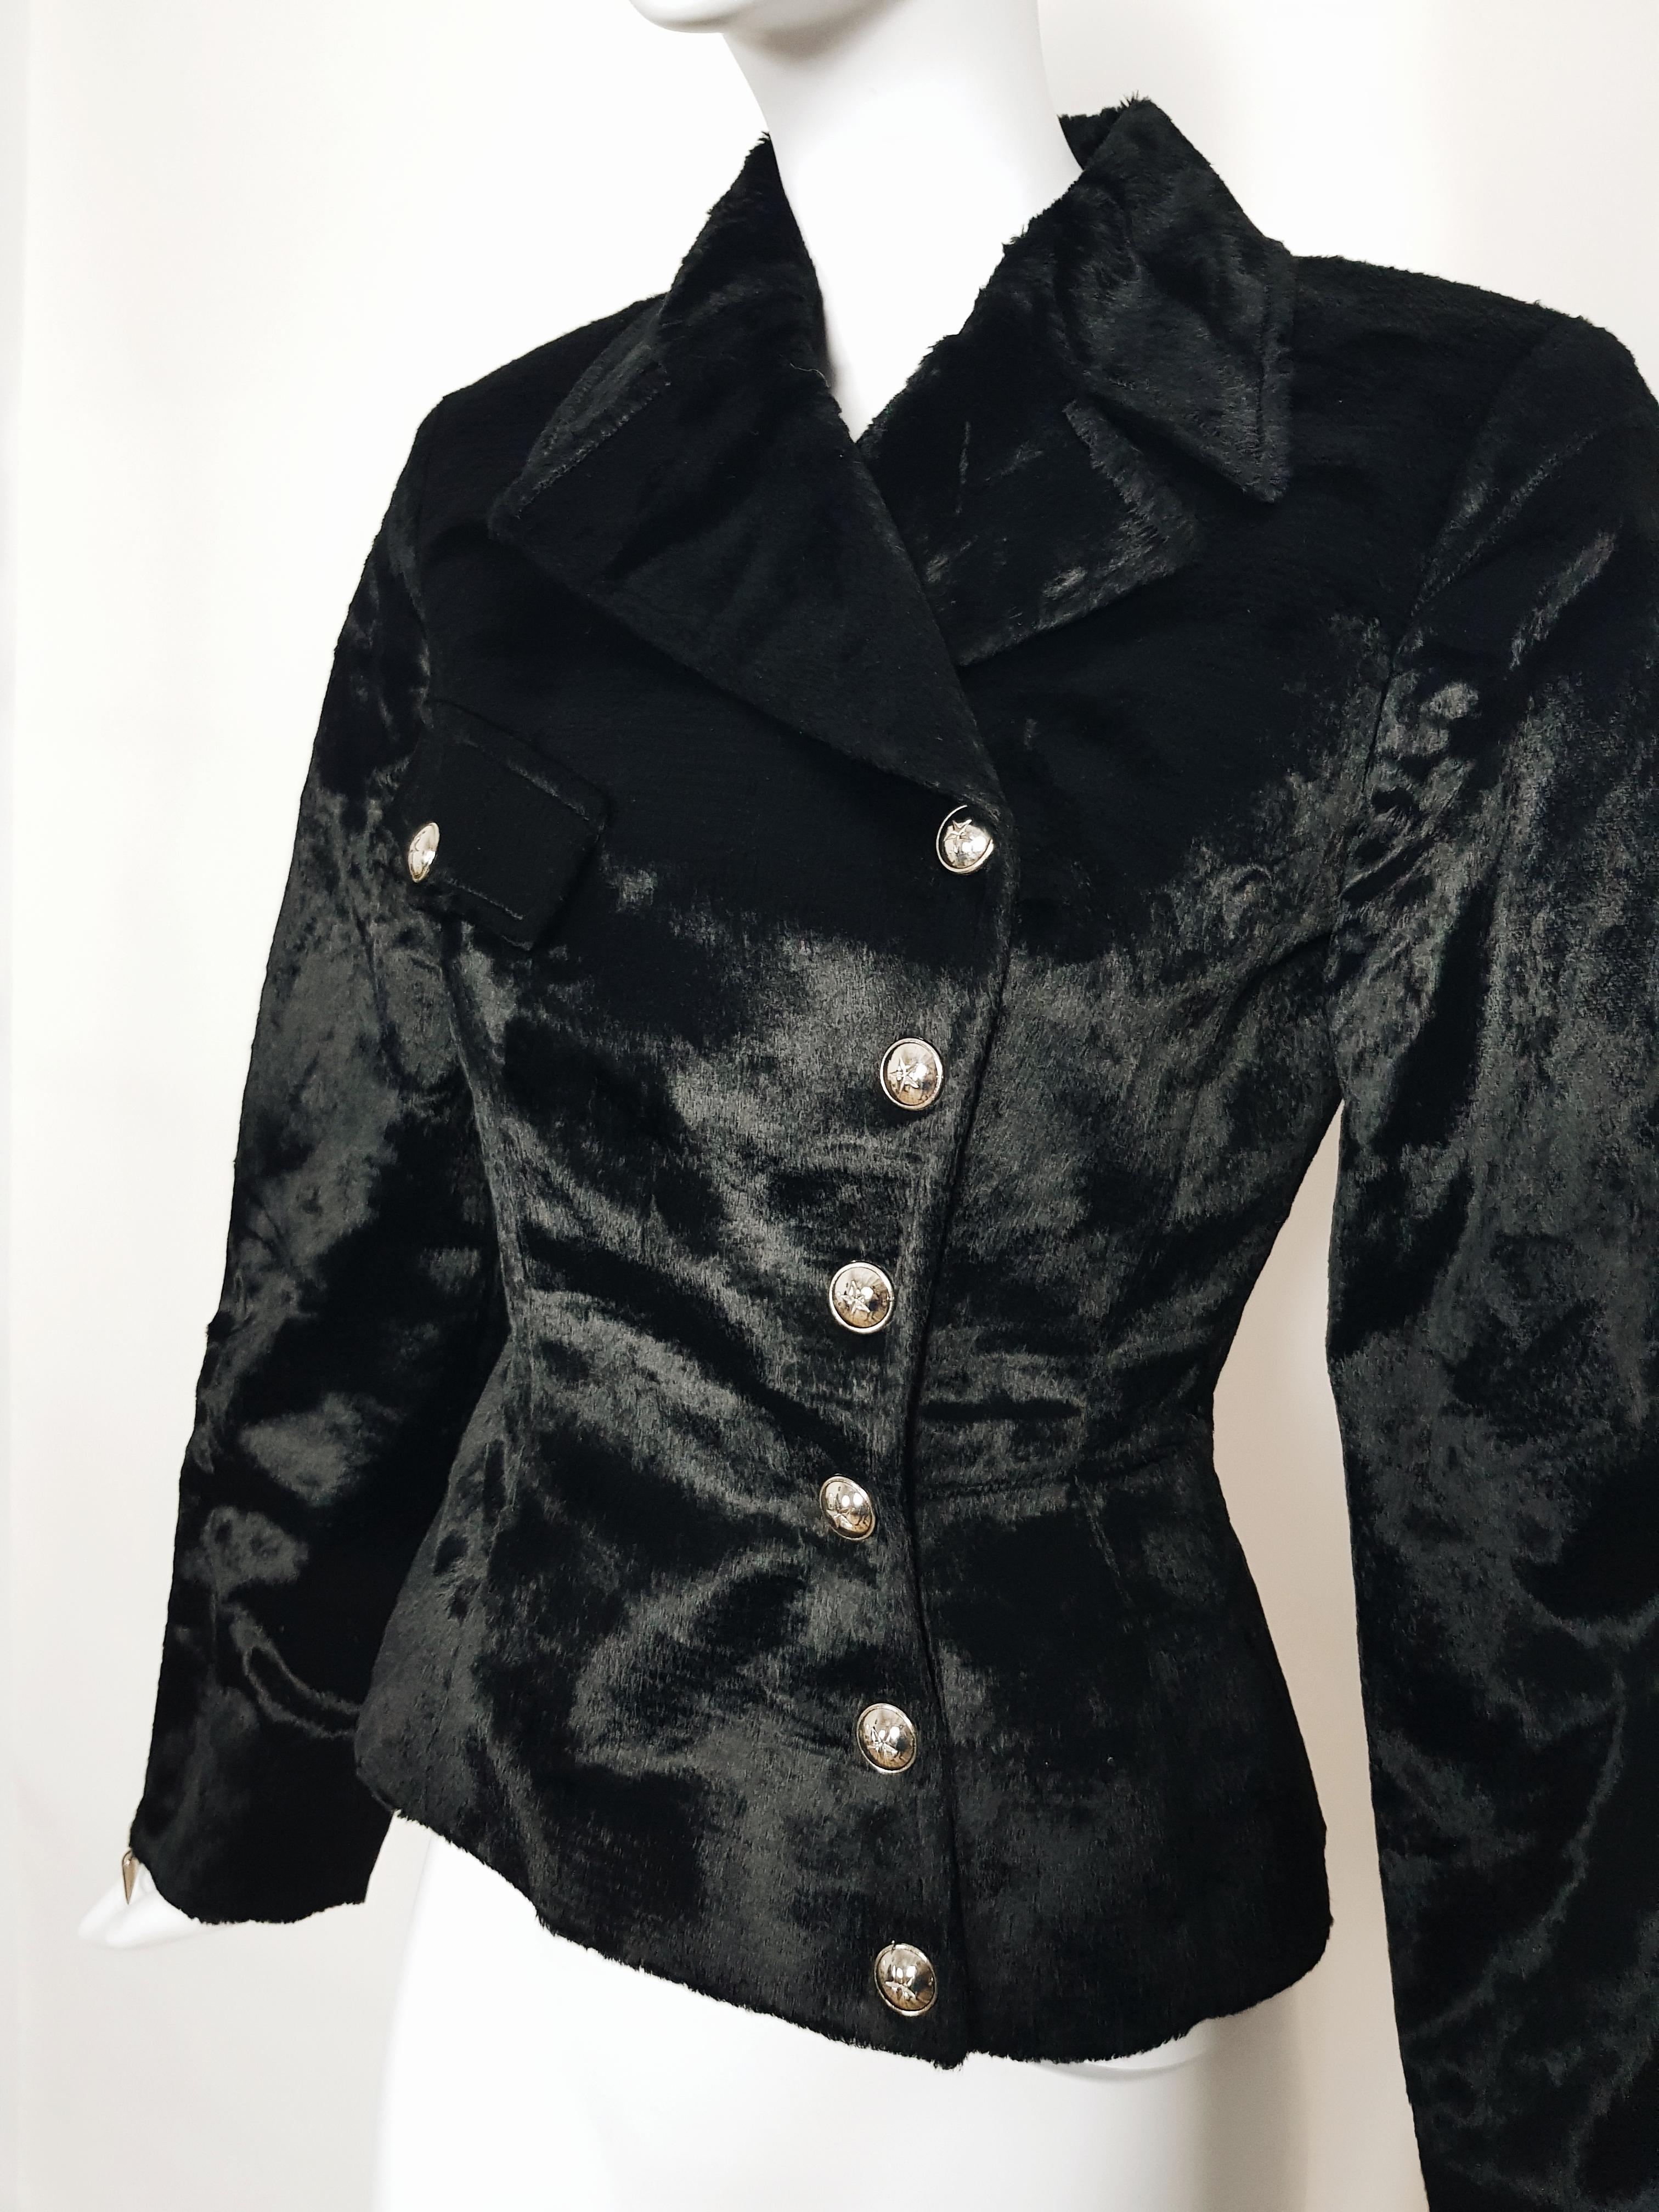 Made of soft black faux fur fabric, this biker jacker has the emblematic sculpted Mugler’s shape. 

-Double breasted biker cut
-Closed by six silver snap buttons embellished with a star
-One breast fake pocket
-Long sleeves with silver decorative